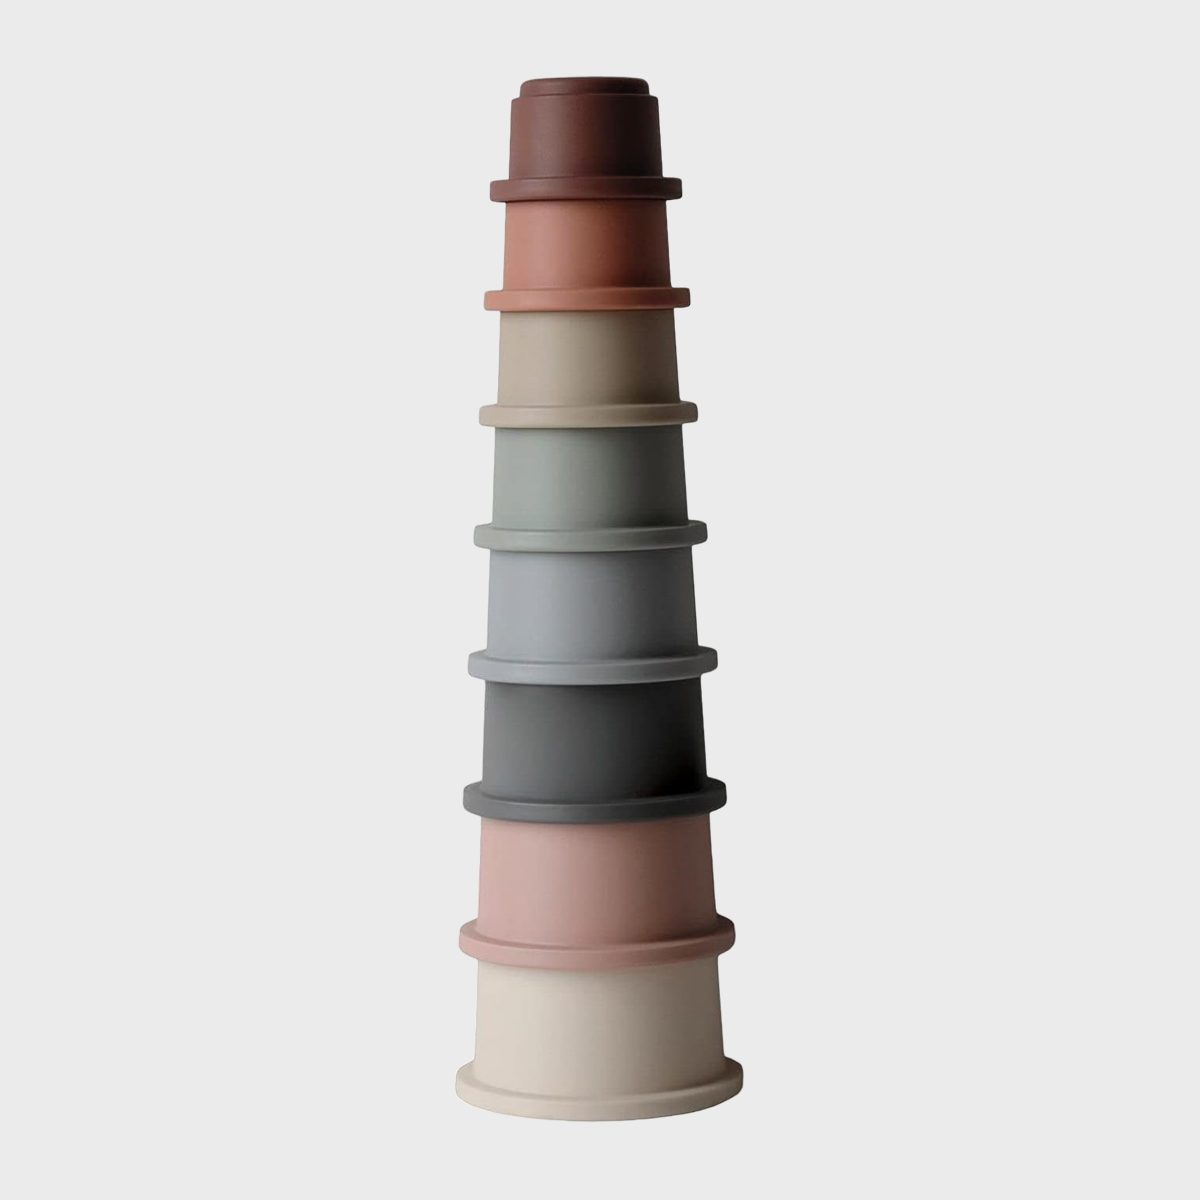 <p>Muted colors are still the trendiest of all, and this set of <a href="https://www.amazon.com/mushie-Stacking-Cups-Denmark-Original/dp/B0858X3VDM" rel="noopener noreferrer">Mushie stacking cups</a> offers all the vintage charm of older toys with the appeal of current colors. It's one of the most popular gender-neutral <a href="https://www.rd.com/article/baby-shower-etiquette/">baby shower gifts</a> and a favorite Amazon baby registry item for those looking to spend less than $20.</p> <p class="listicle-page__cta-button-shop"><a class="shop-btn" href="https://www.amazon.com/mushie-Stacking-Cups-Denmark-Original/dp/B0858X3VDM">Shop Now</a></p>